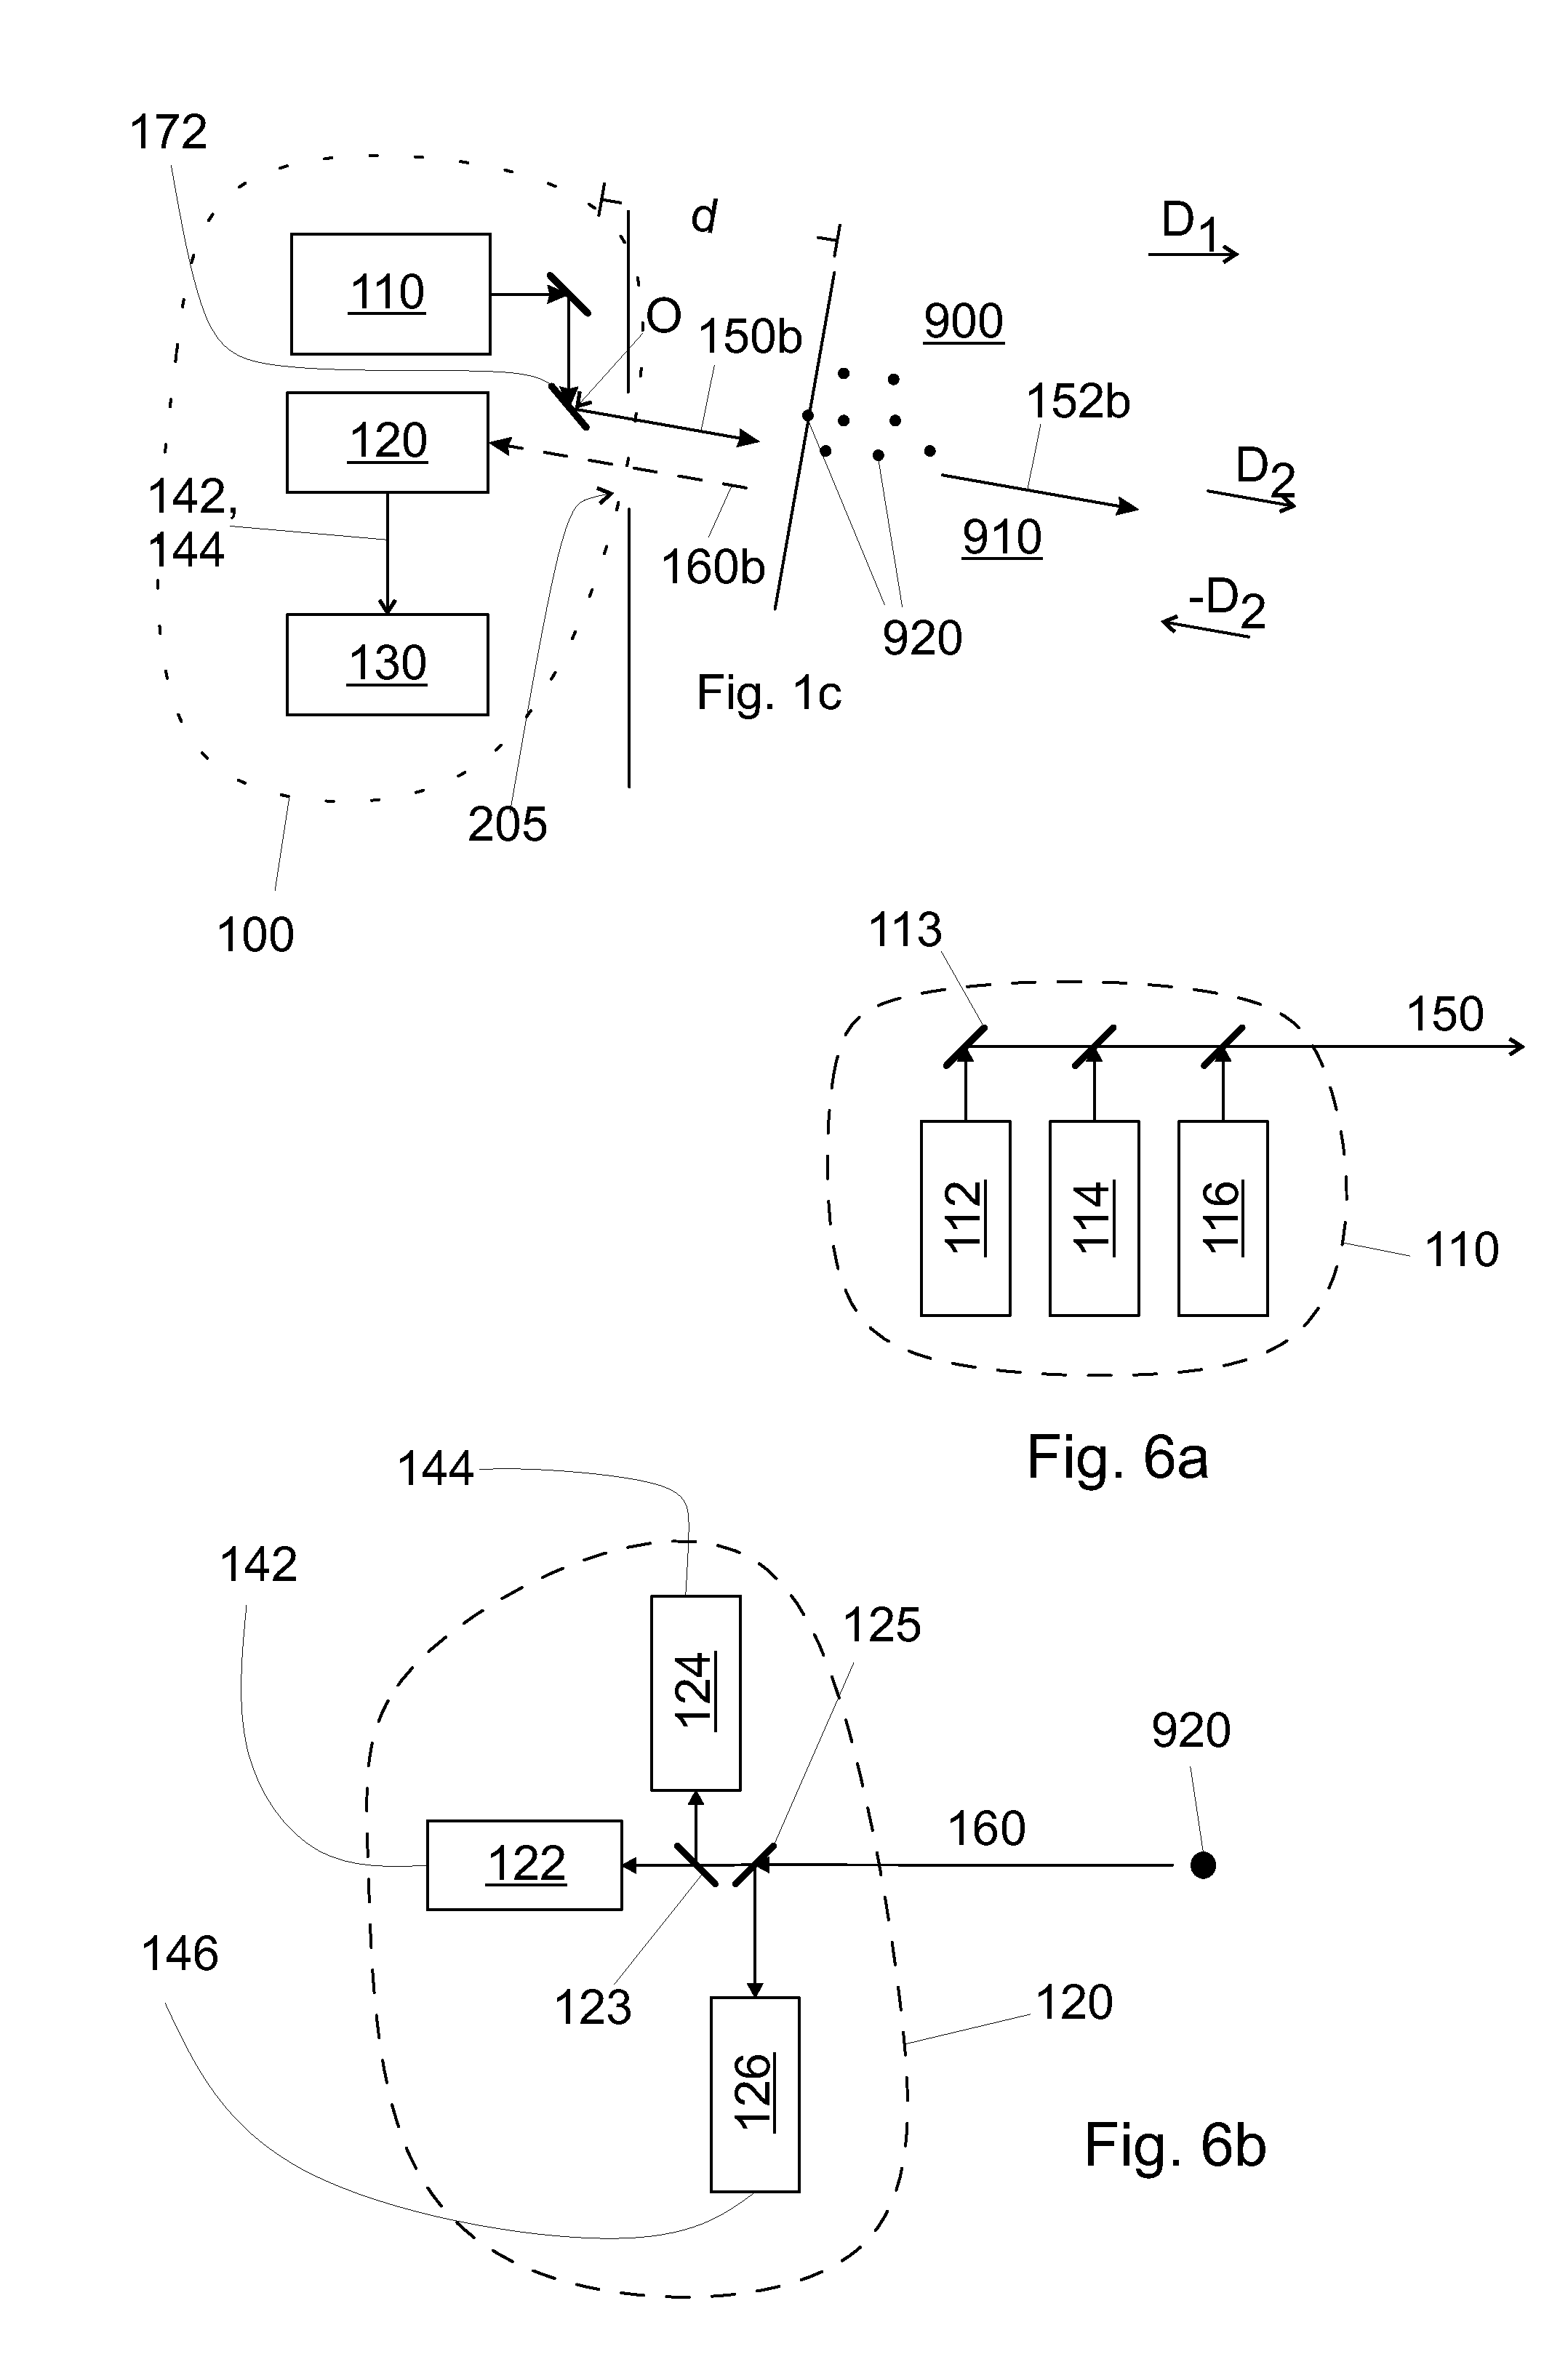 Method for measuring temperature, molecular number density, and/or pressure of a gaseous compound from a thermal device, and a thermal system